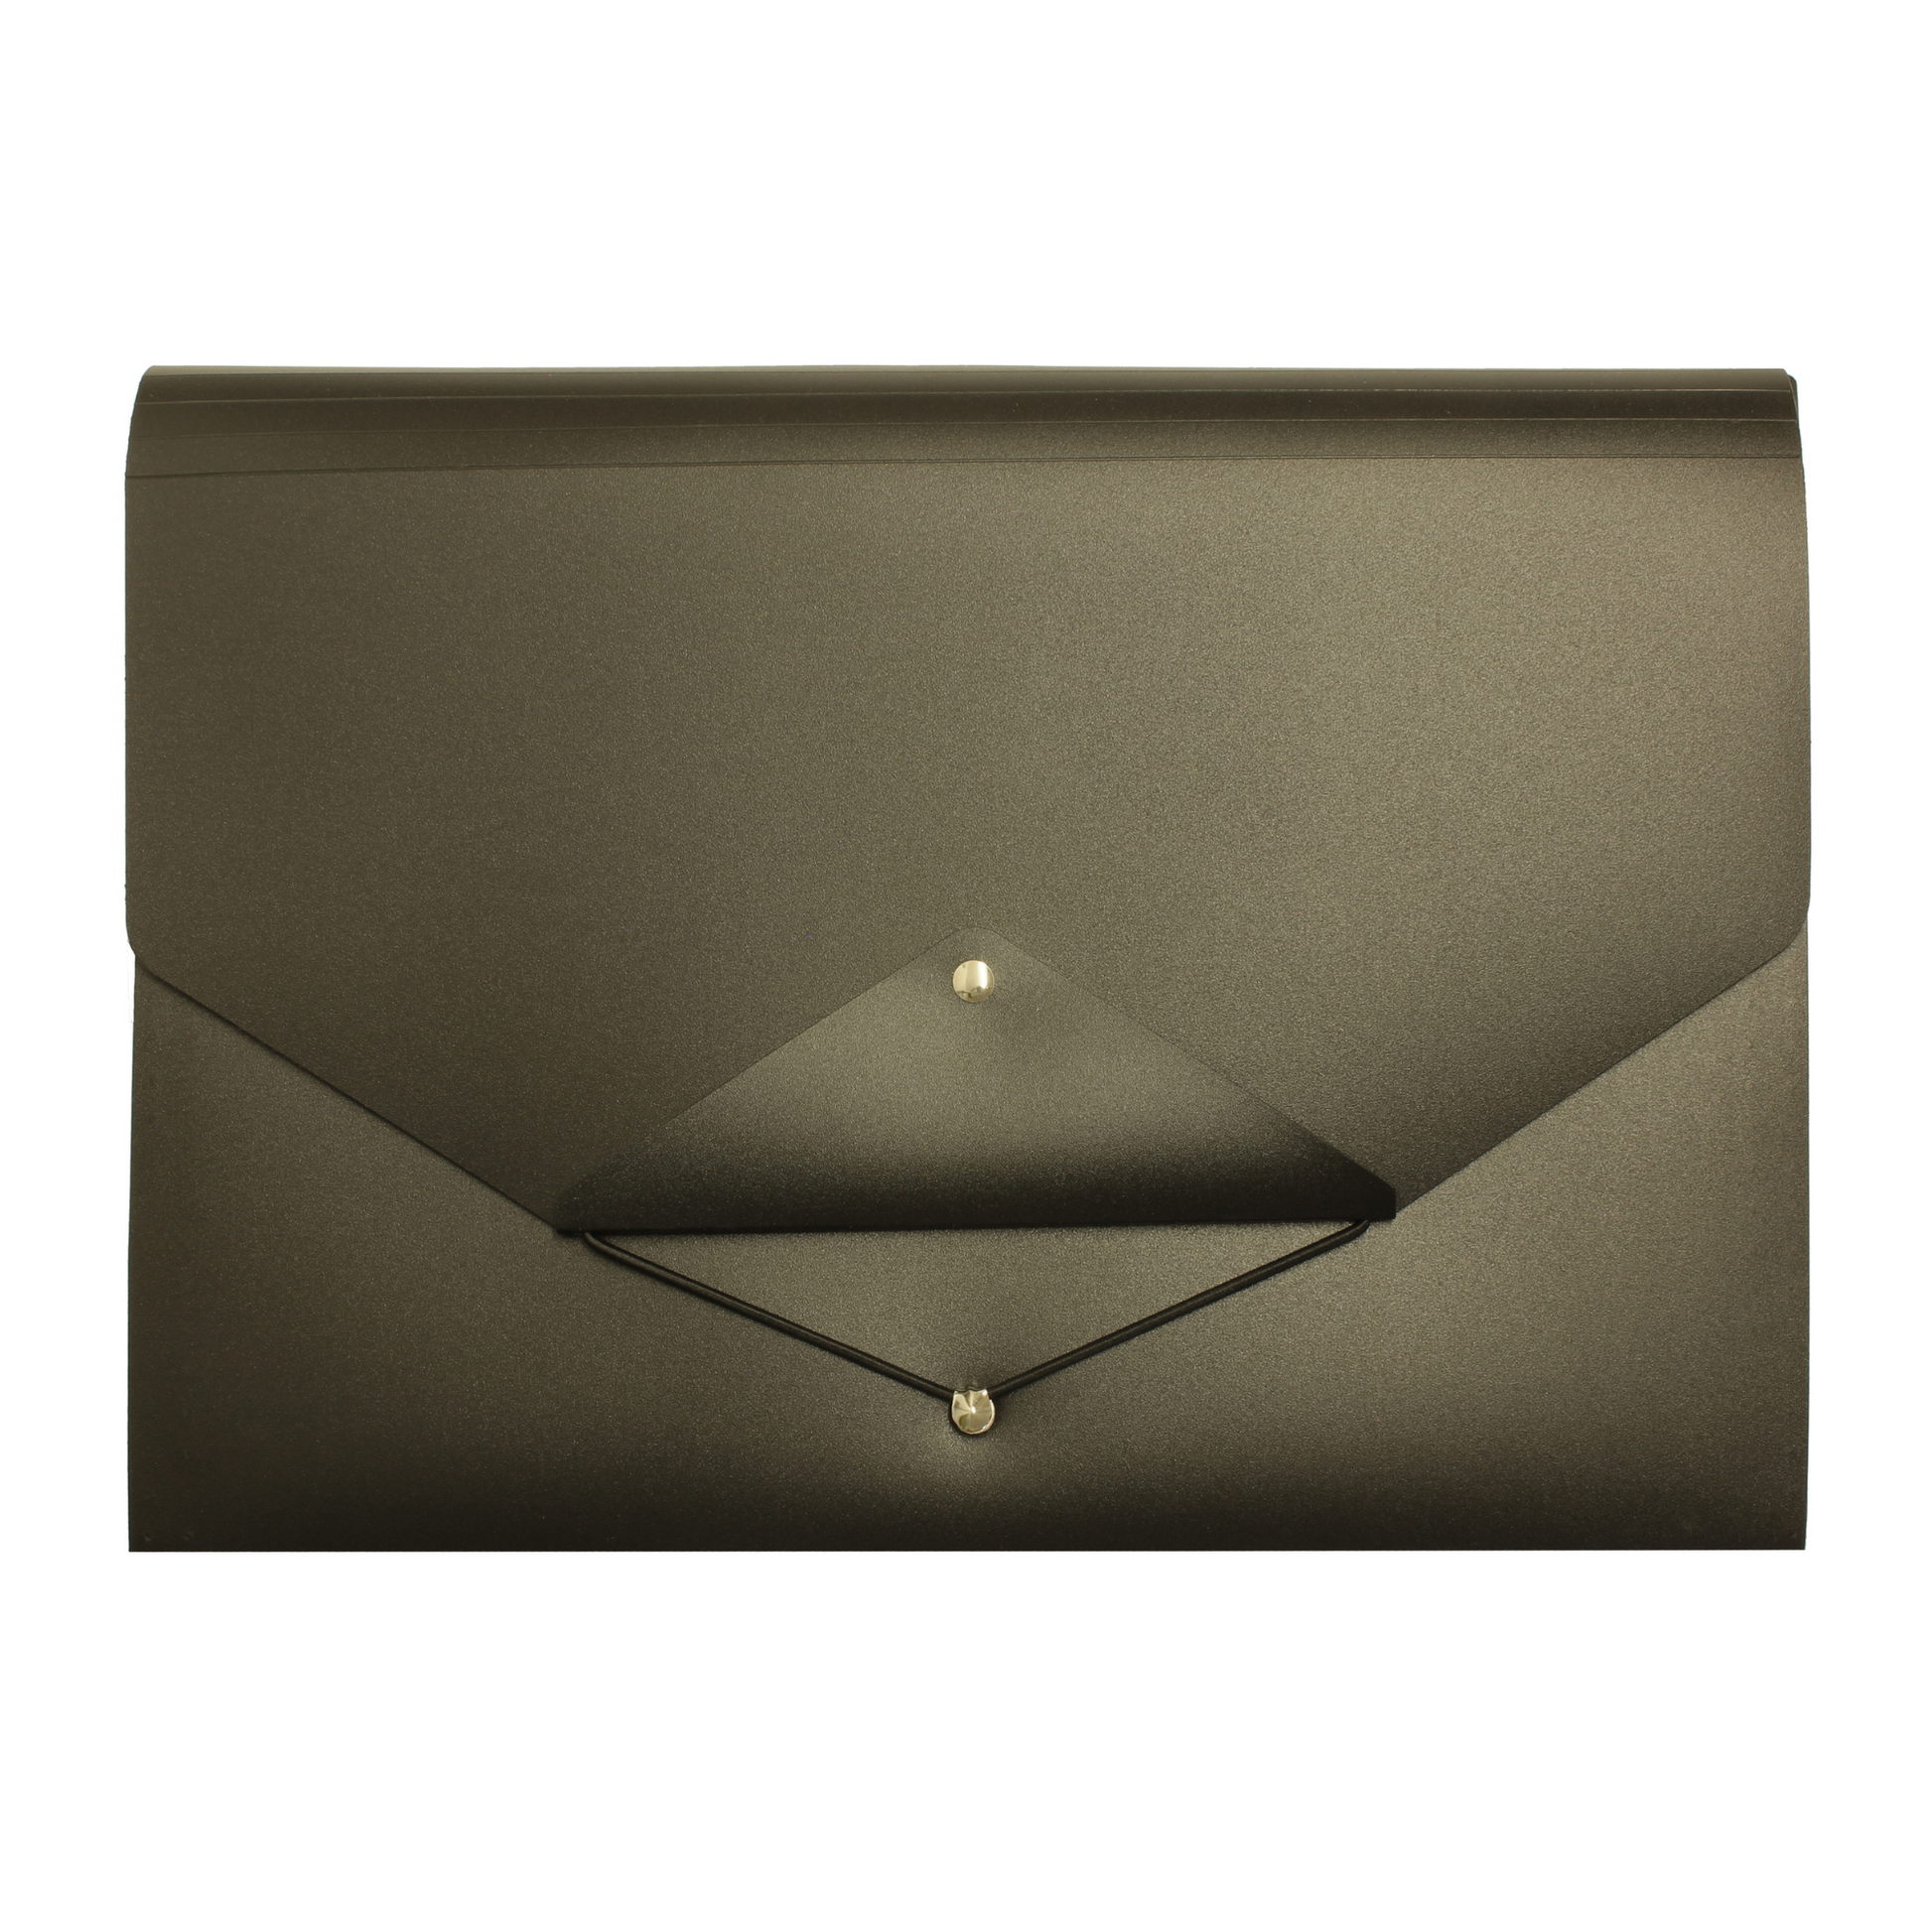 A black envelope-style folder with a black triangular flap and an elastic closure. The folder's material has a subtle texture, and it is designed for document storage with a stylish and professional appearance.